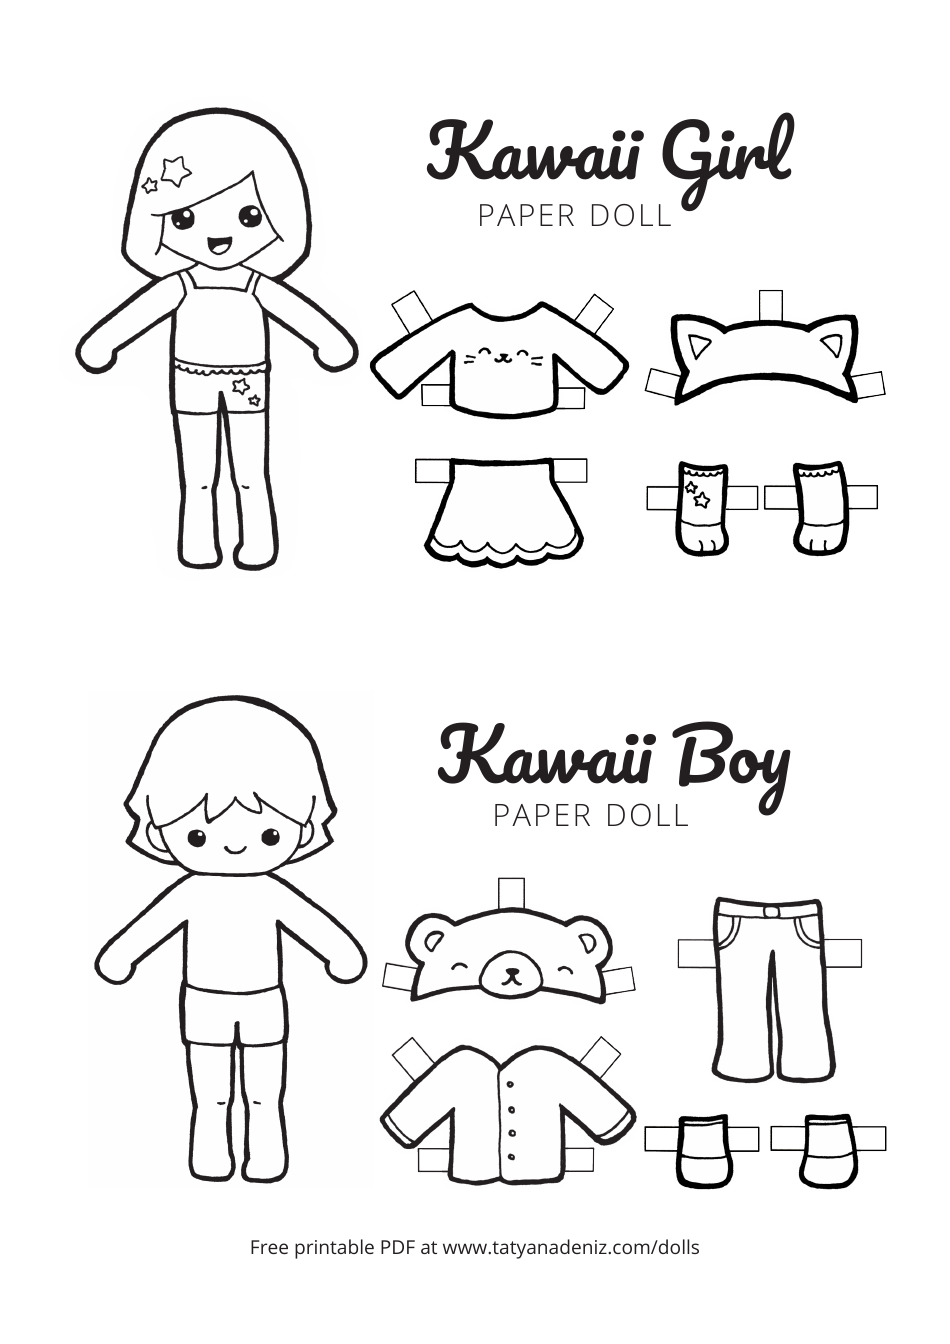 Paper Doll Cut Out Templates